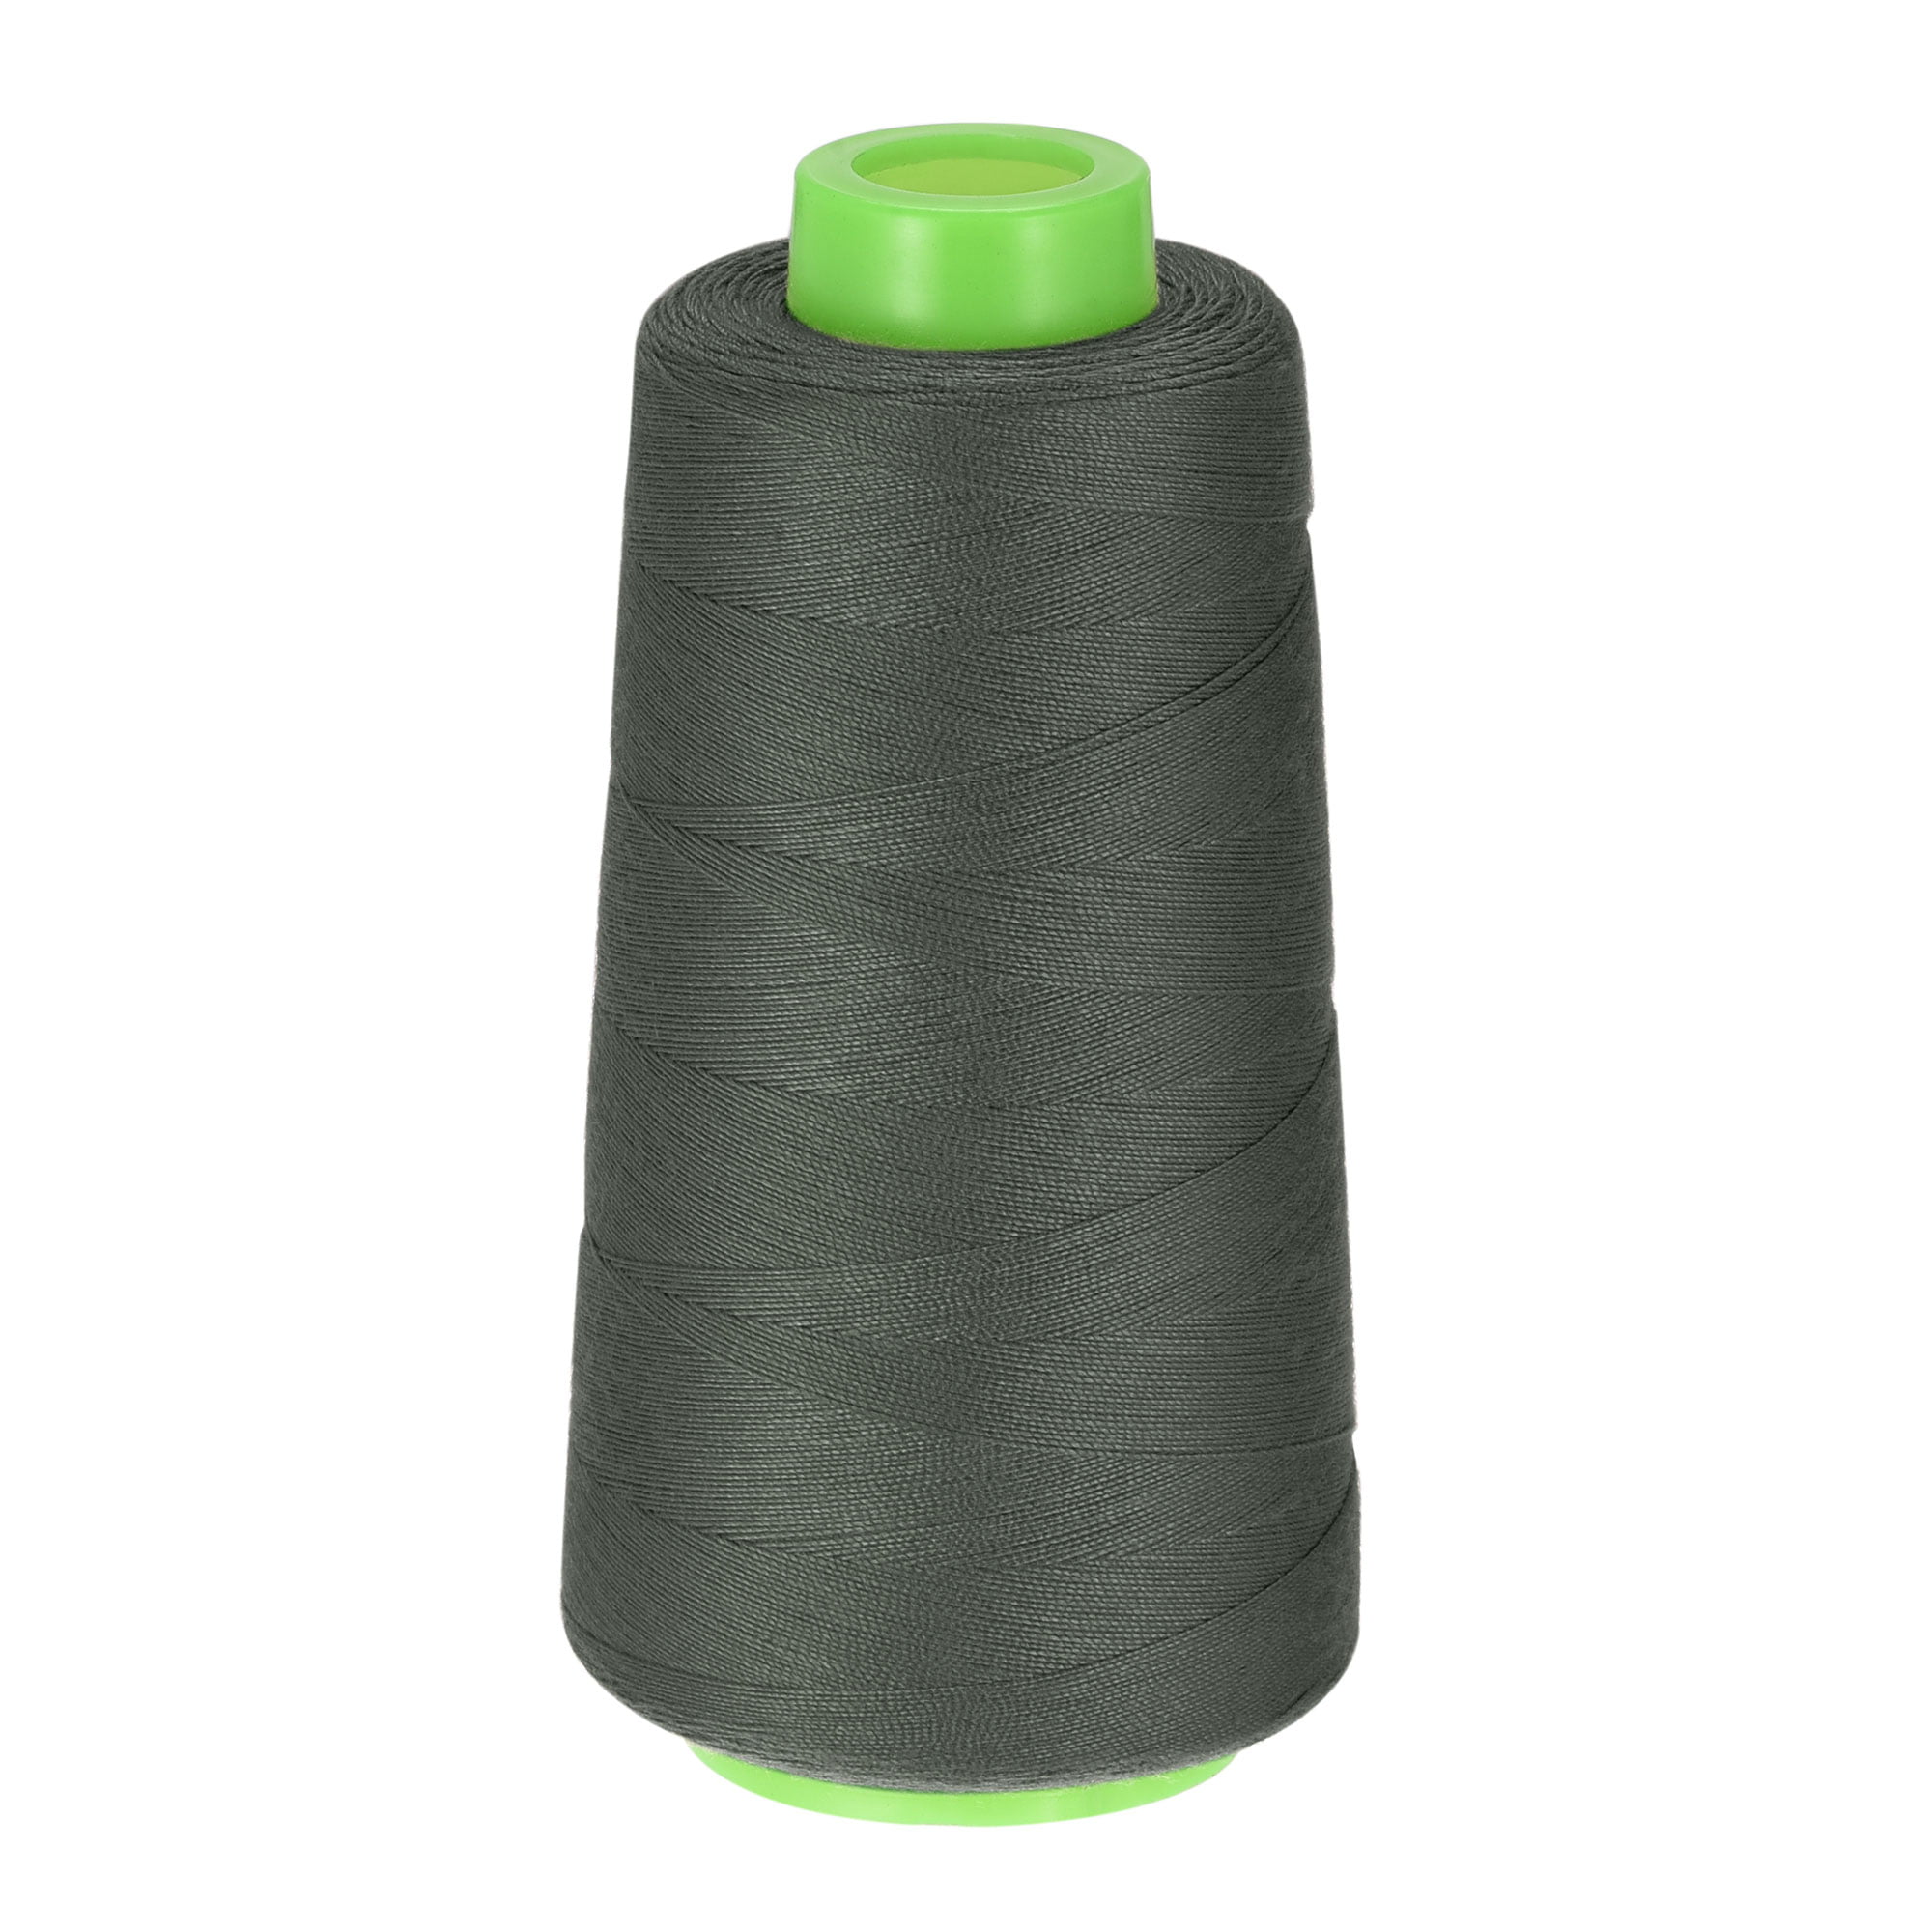 64,000 Sewing Threads Green Images, Stock Photos, 3D objects, & Vectors